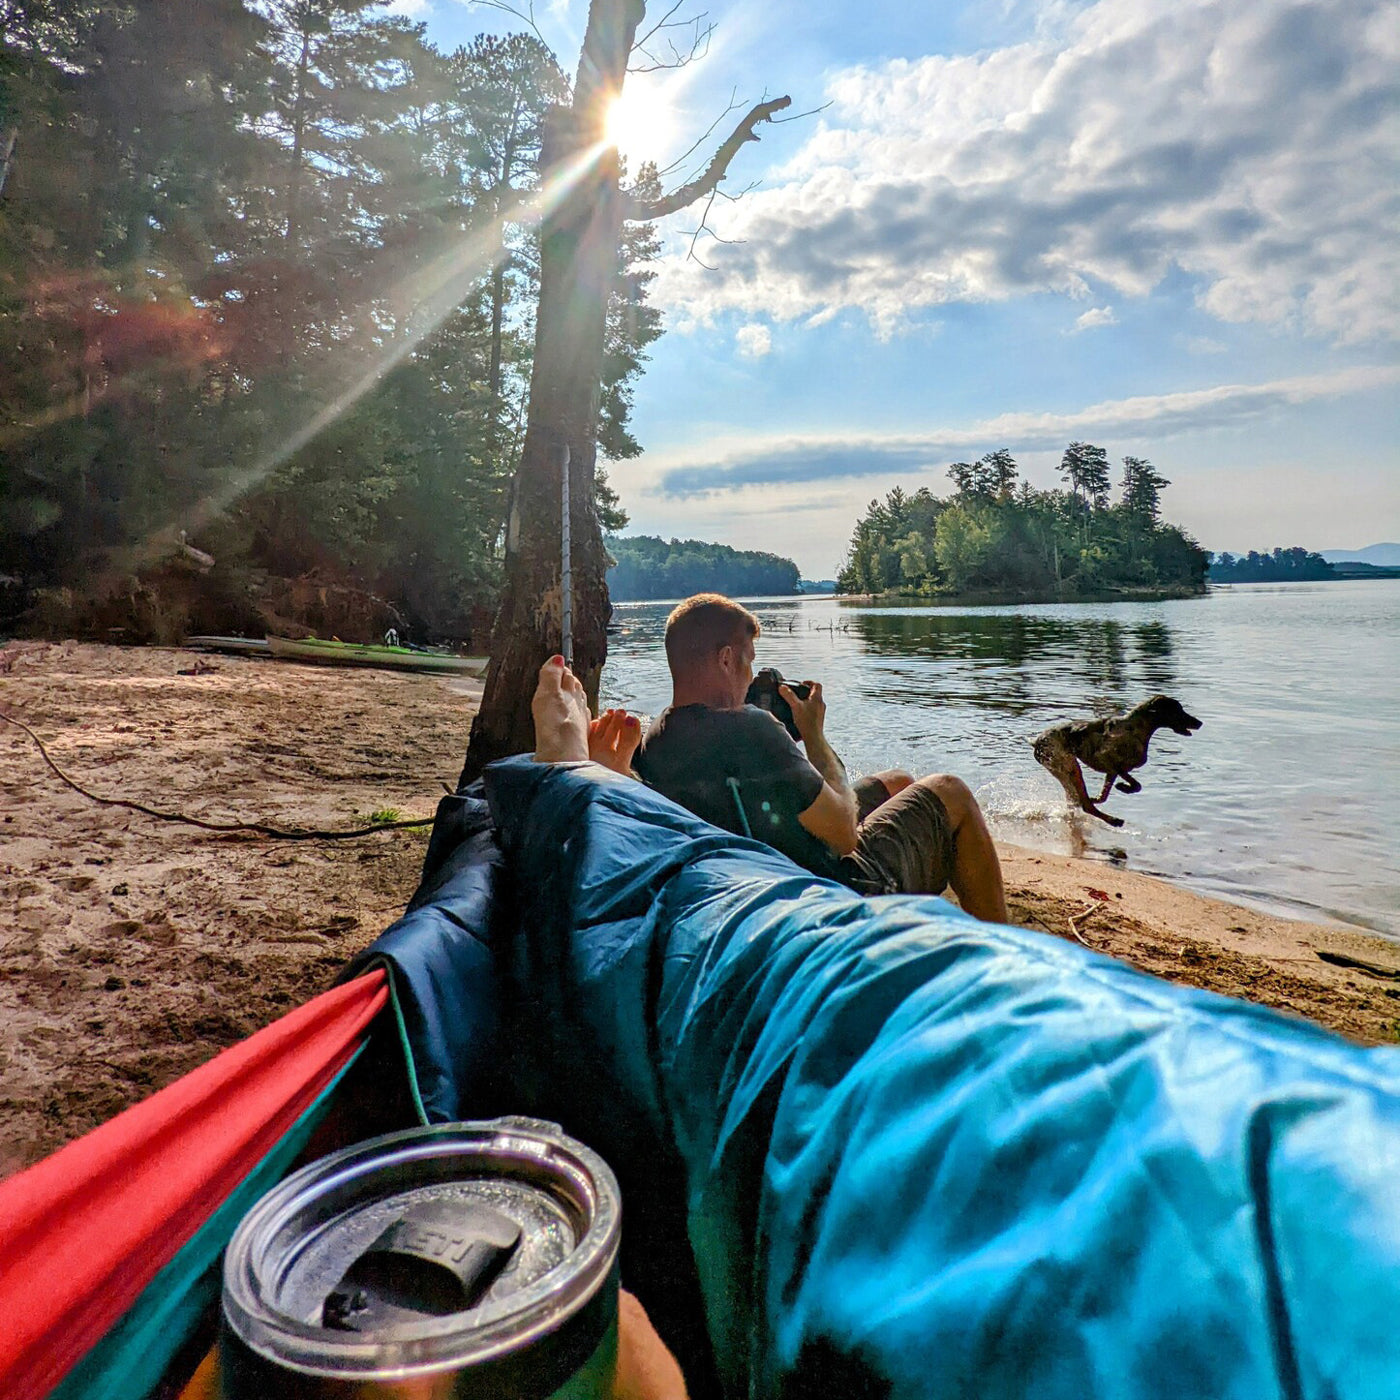 A woman lays in her hammock with a thermos next to her partner holding a camera and a dog running on the beach.